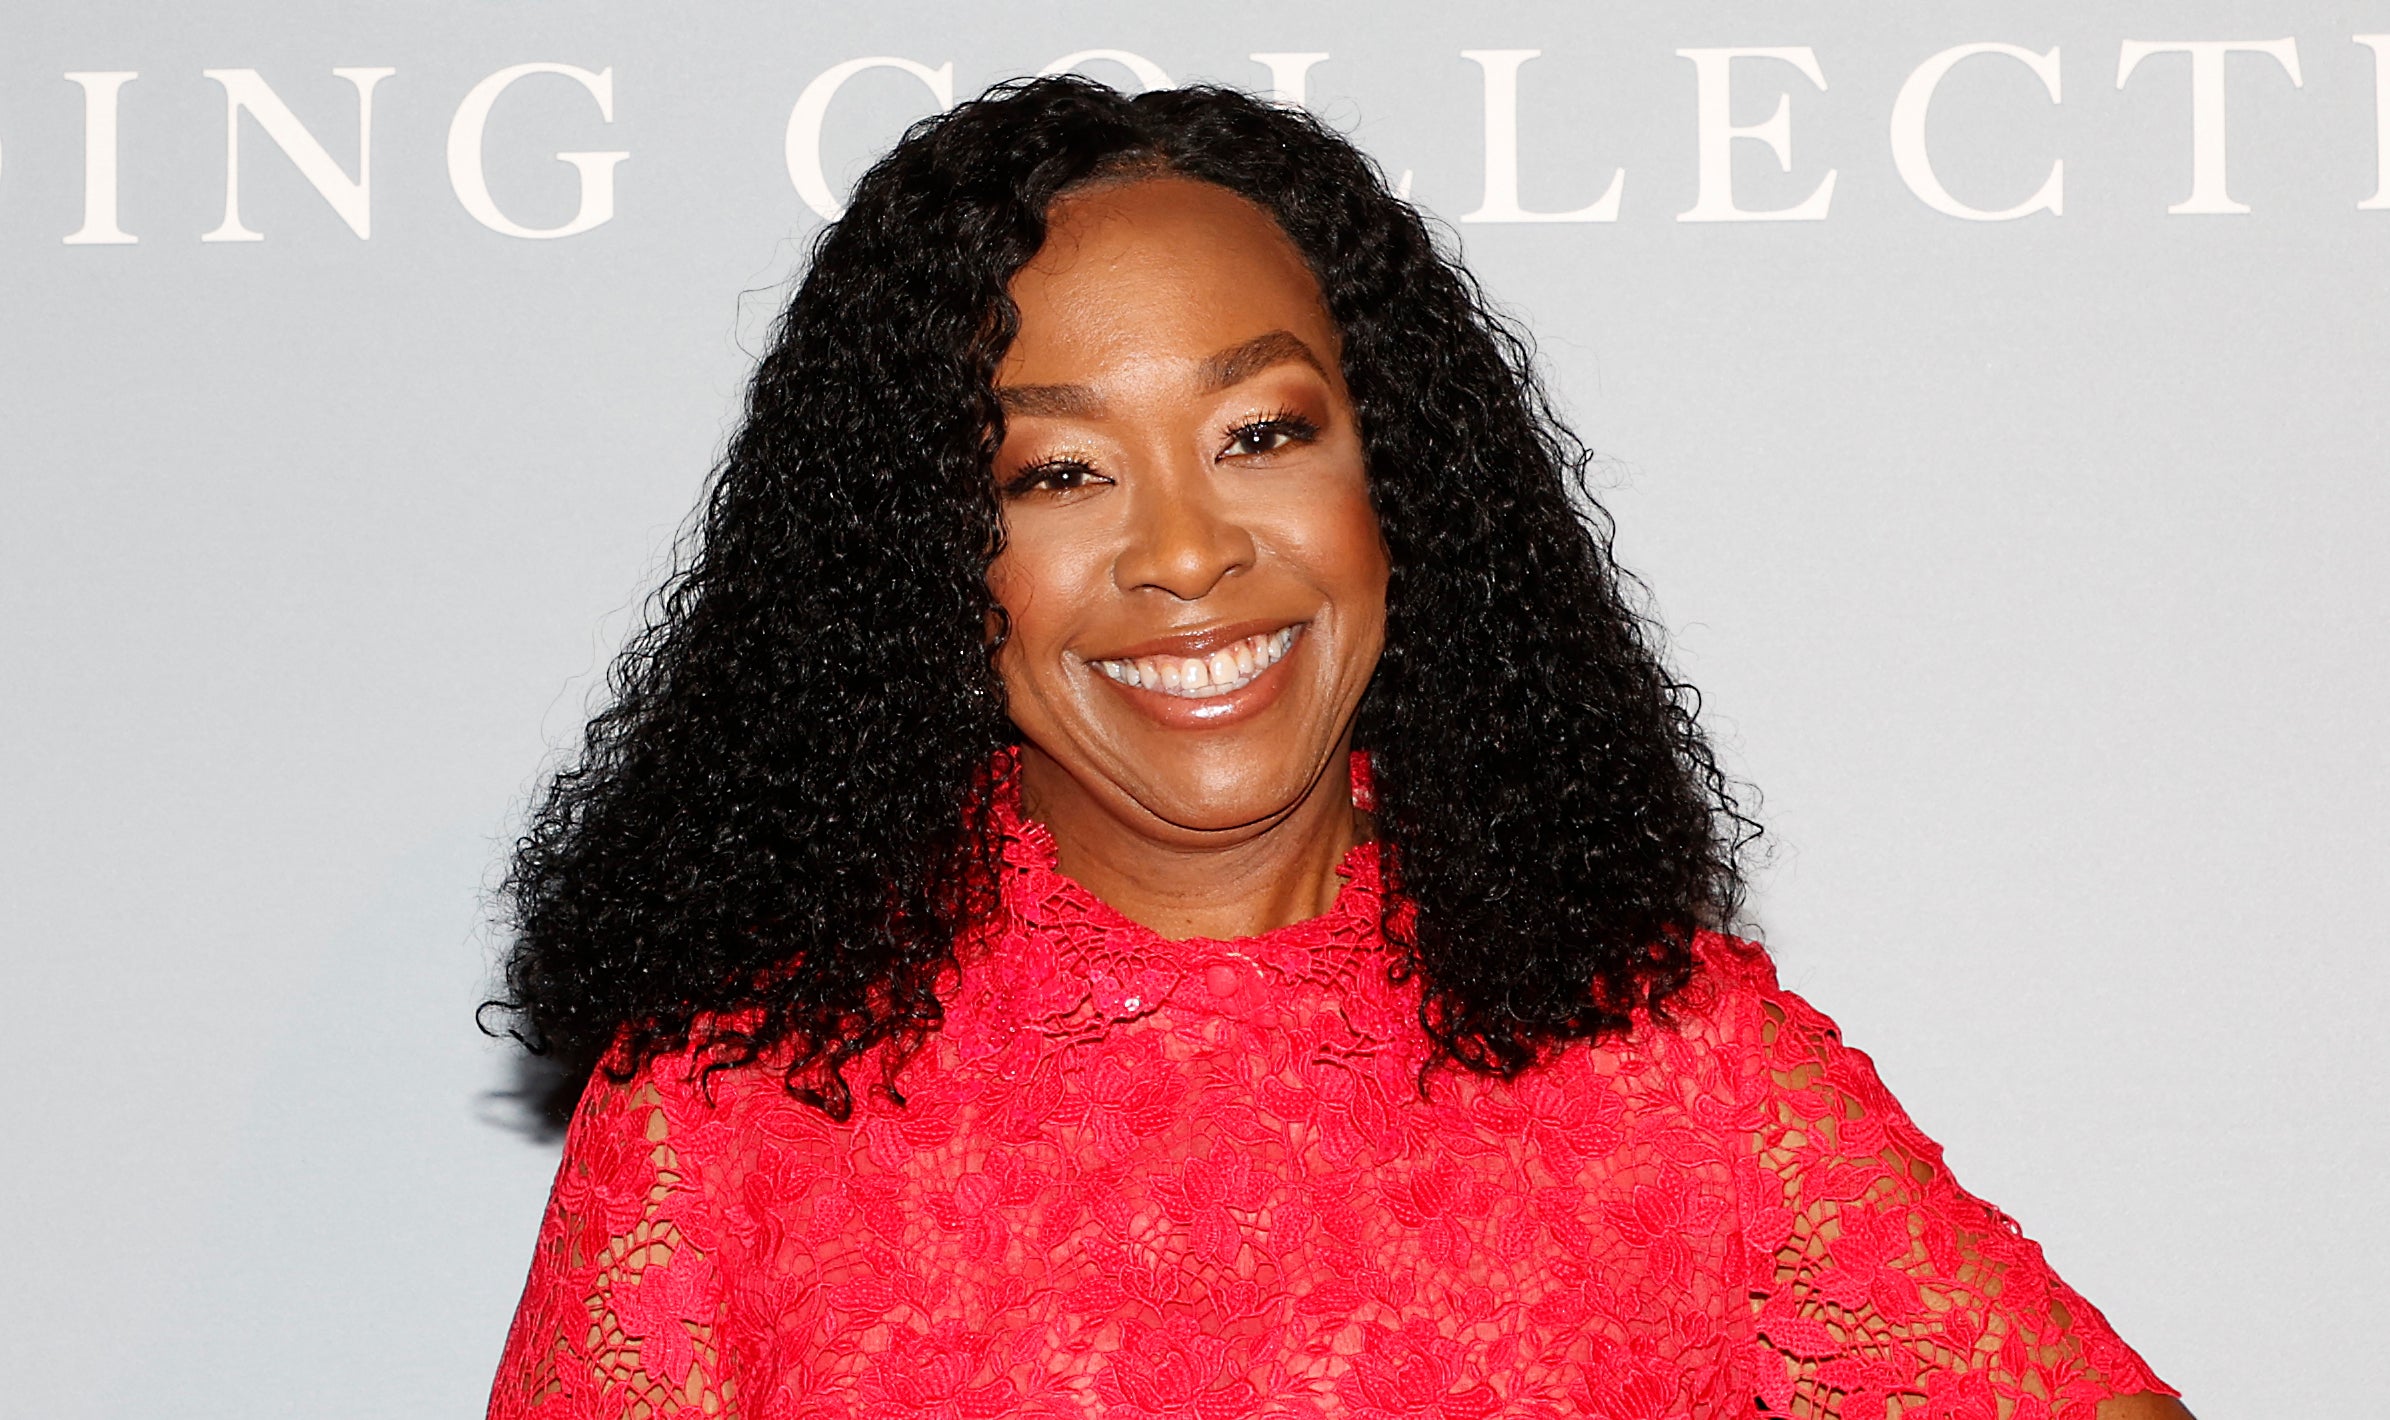 Shonda Rhimes says imposter syndrome ‘doesn’t make sense’ to her